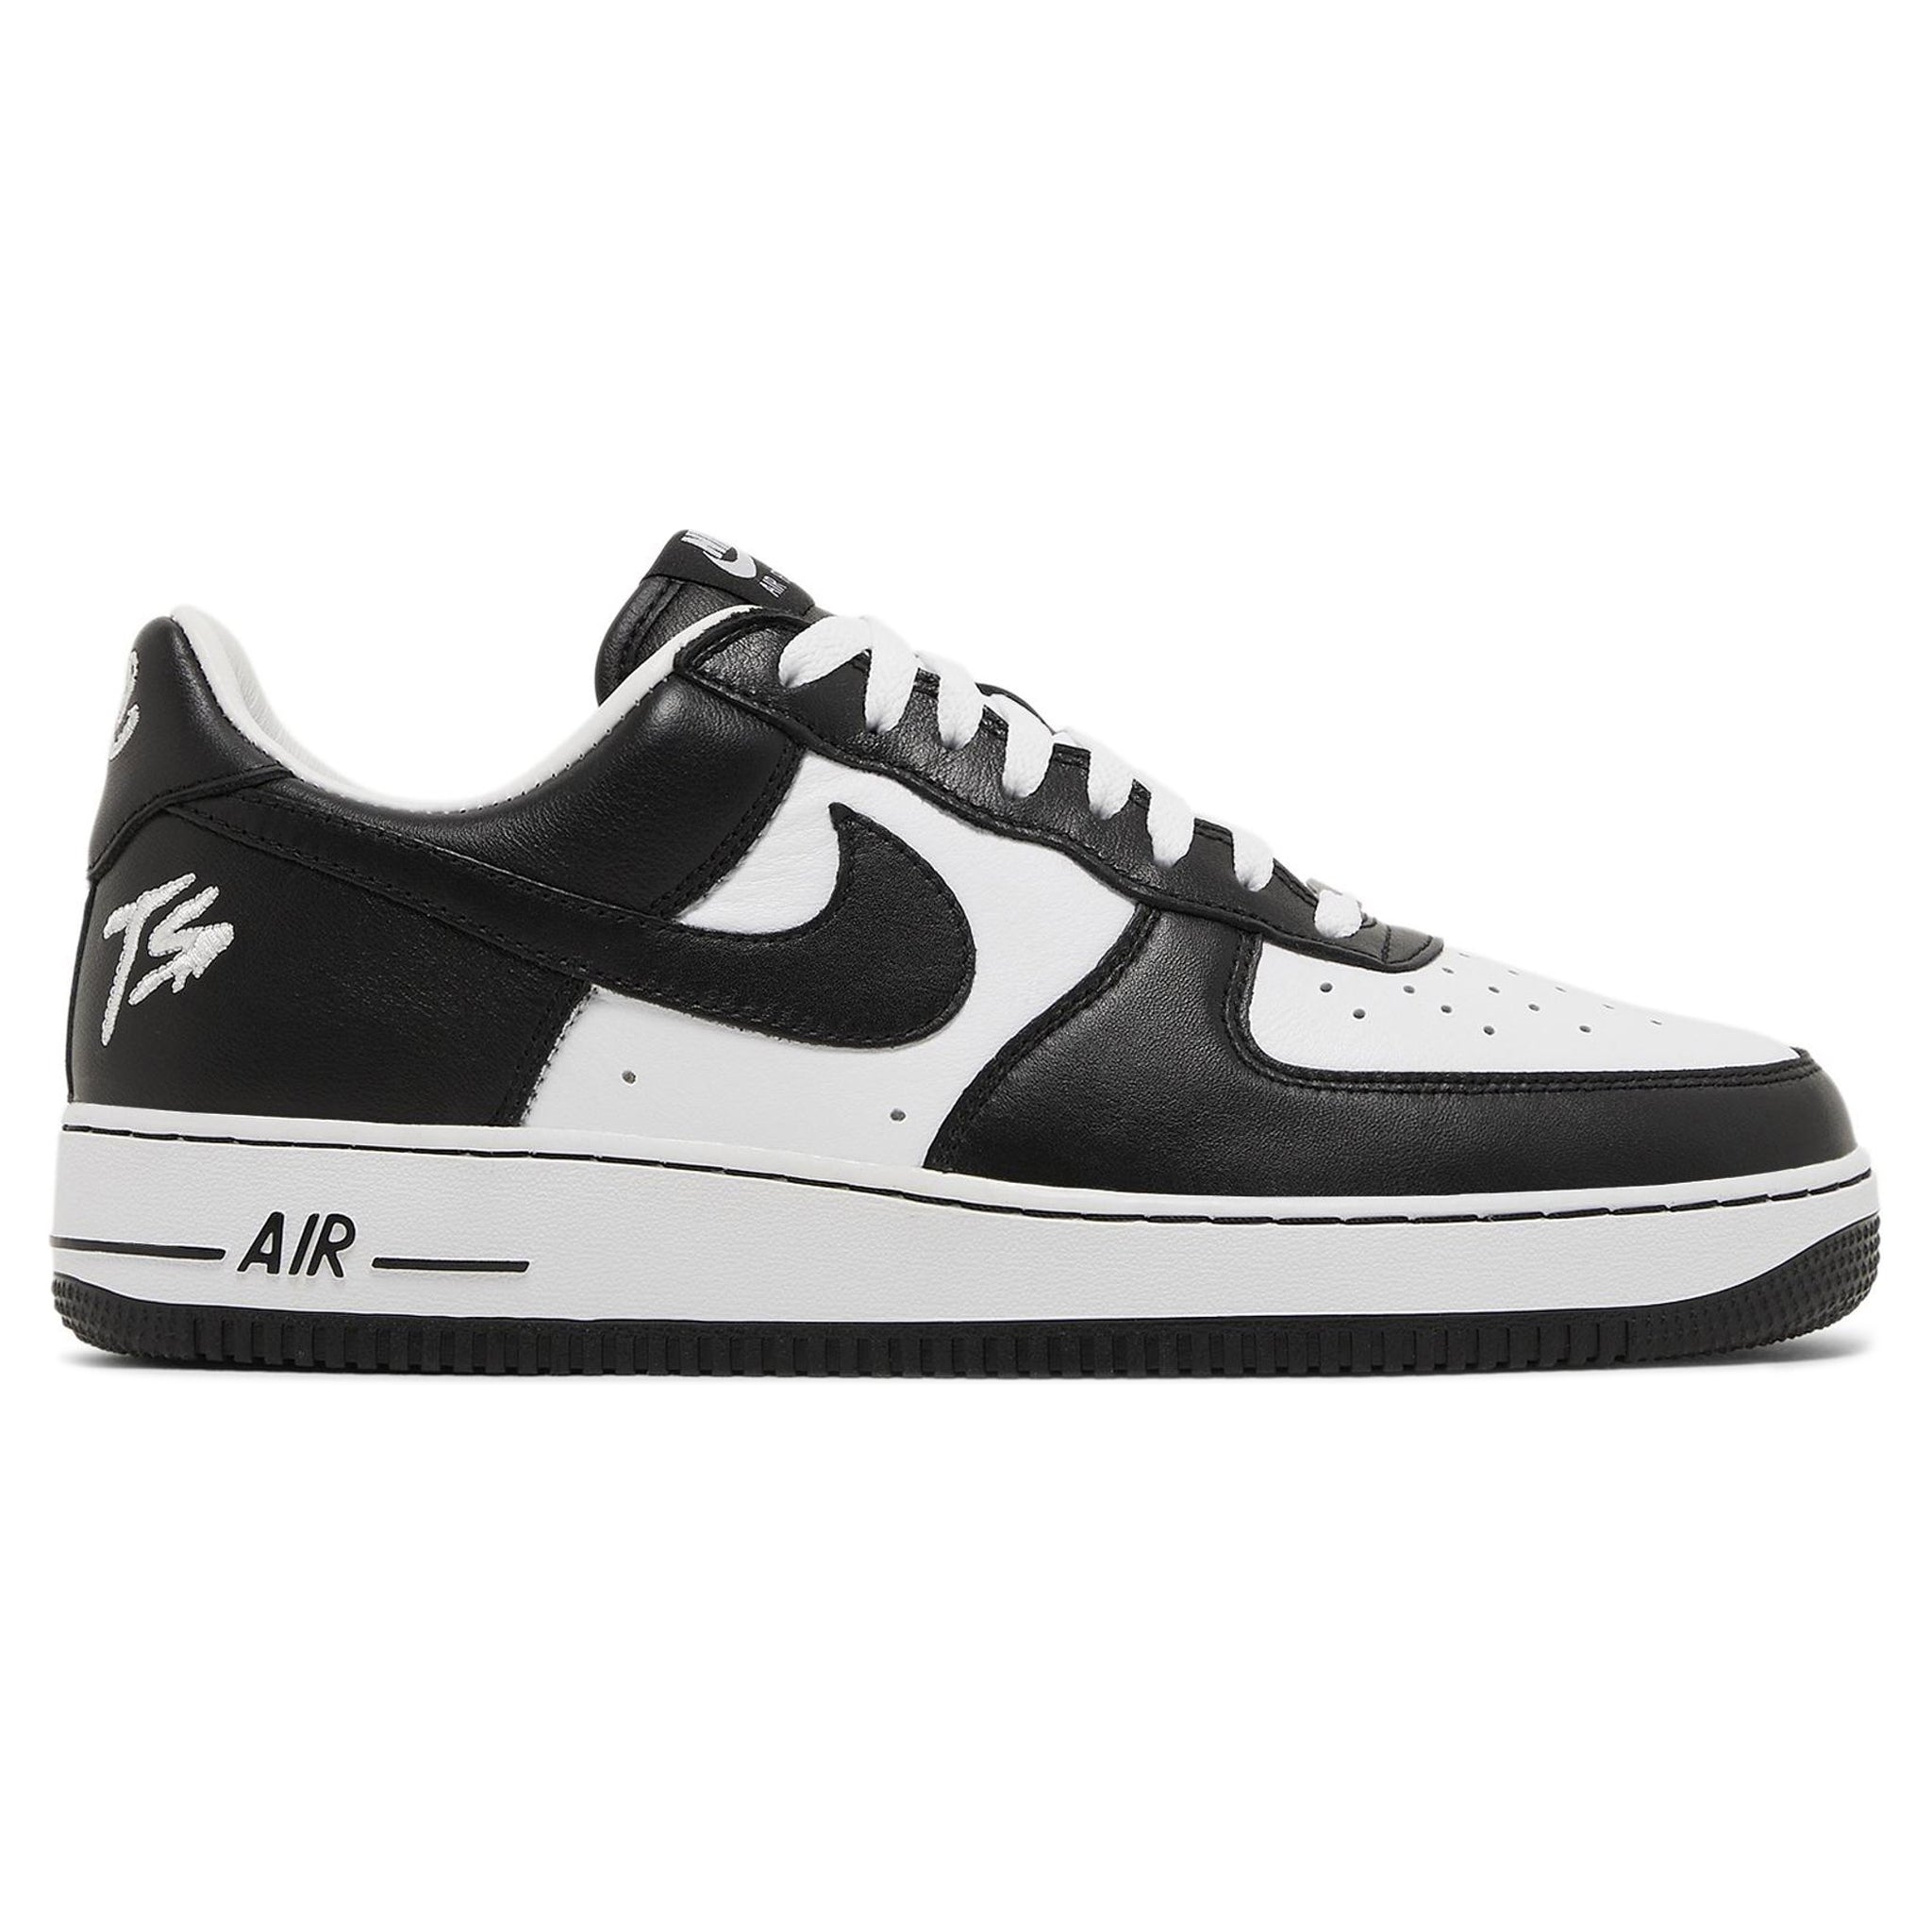 Side View of terror squad x nike air force 1 low white black fd7855-001